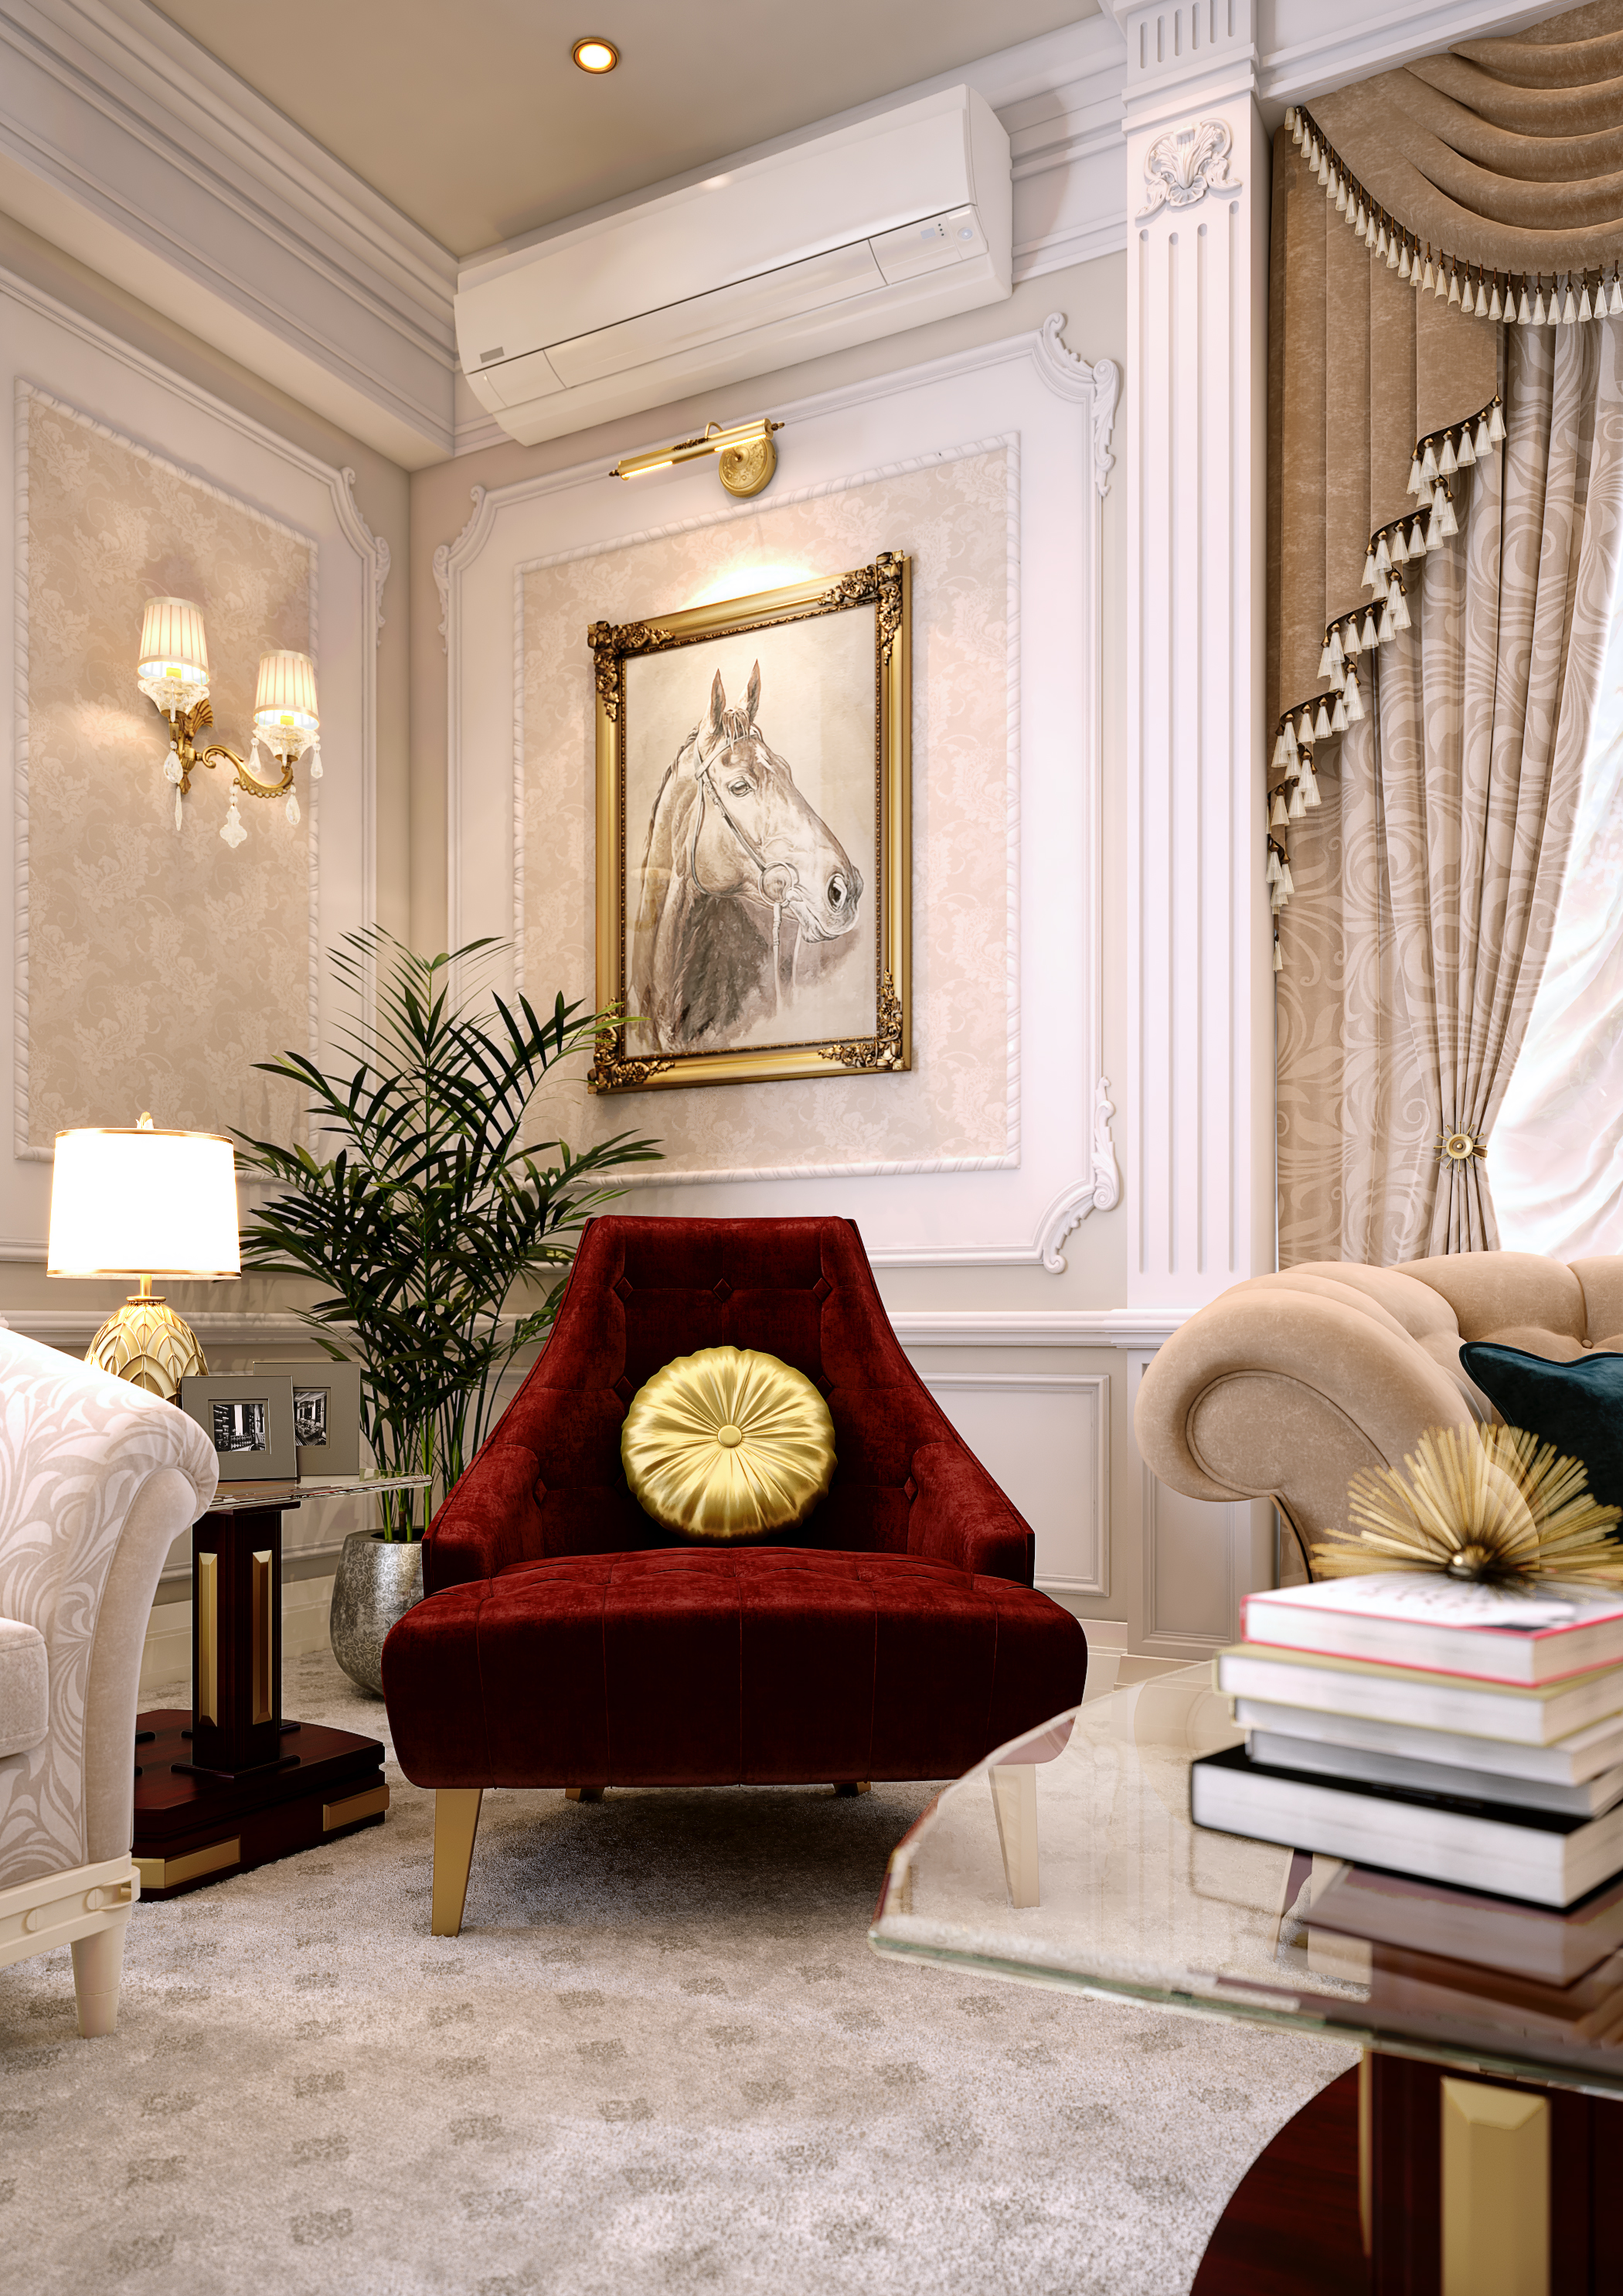 Classic Living area in 3d max vray 3.0 image